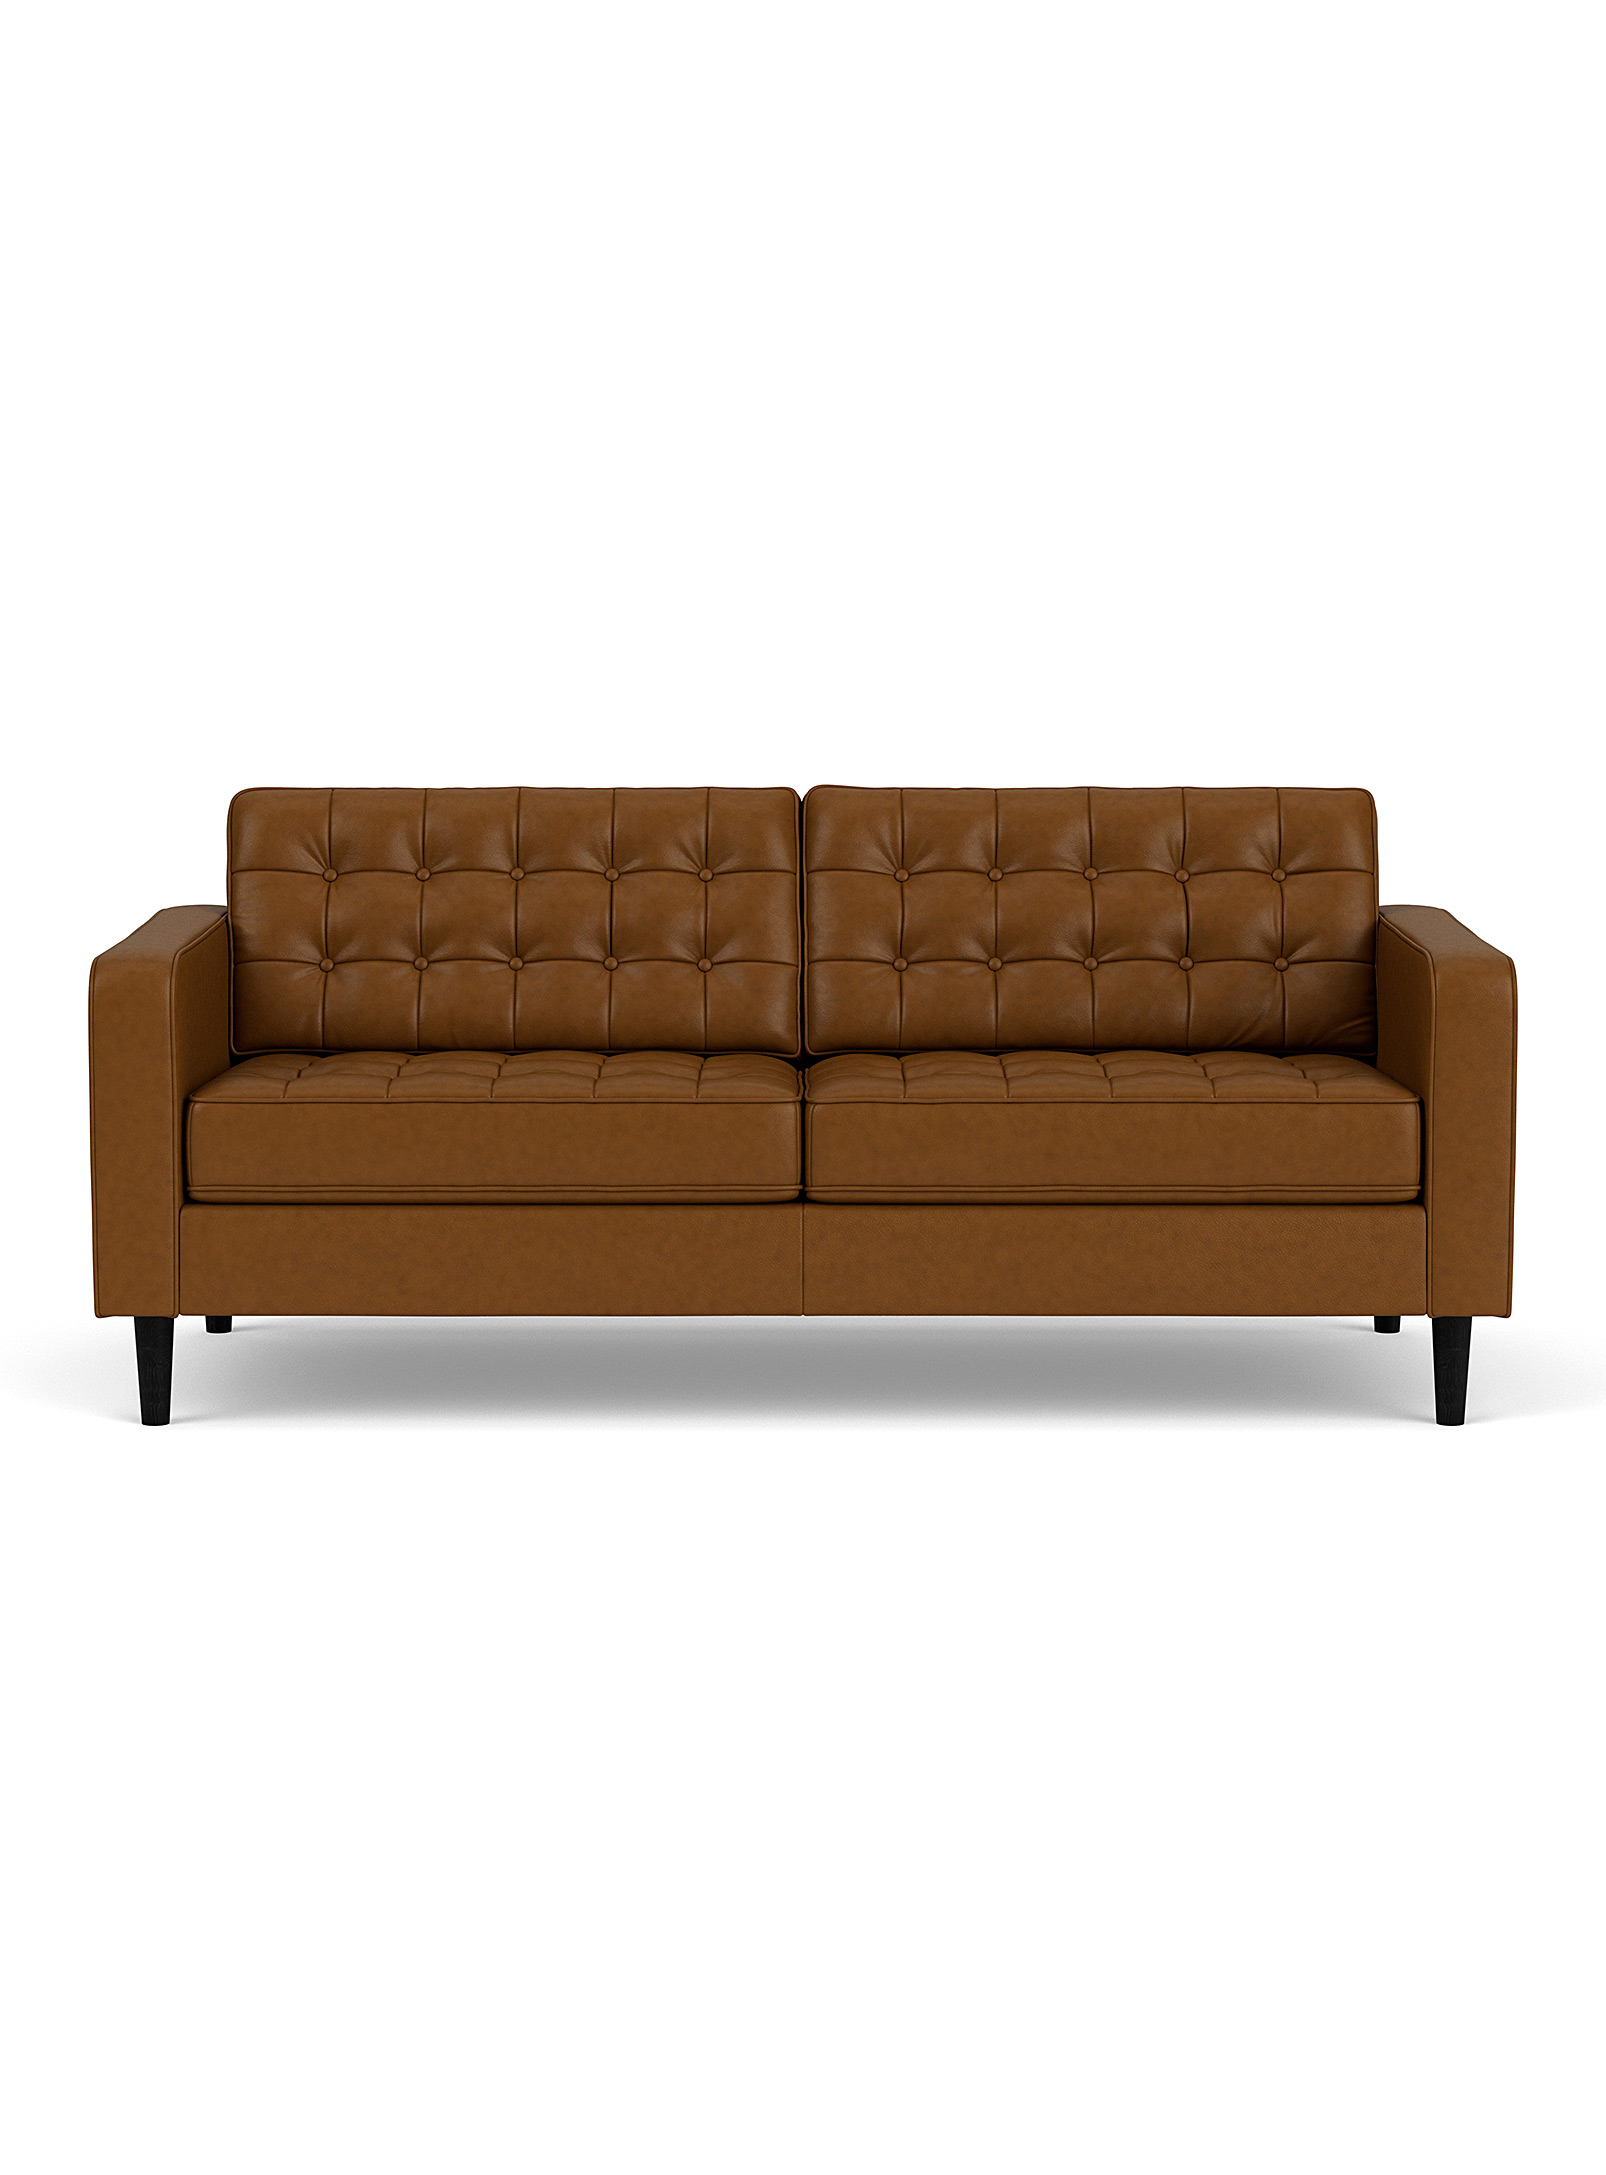 EQ3 - Reverie leather upholstered couch